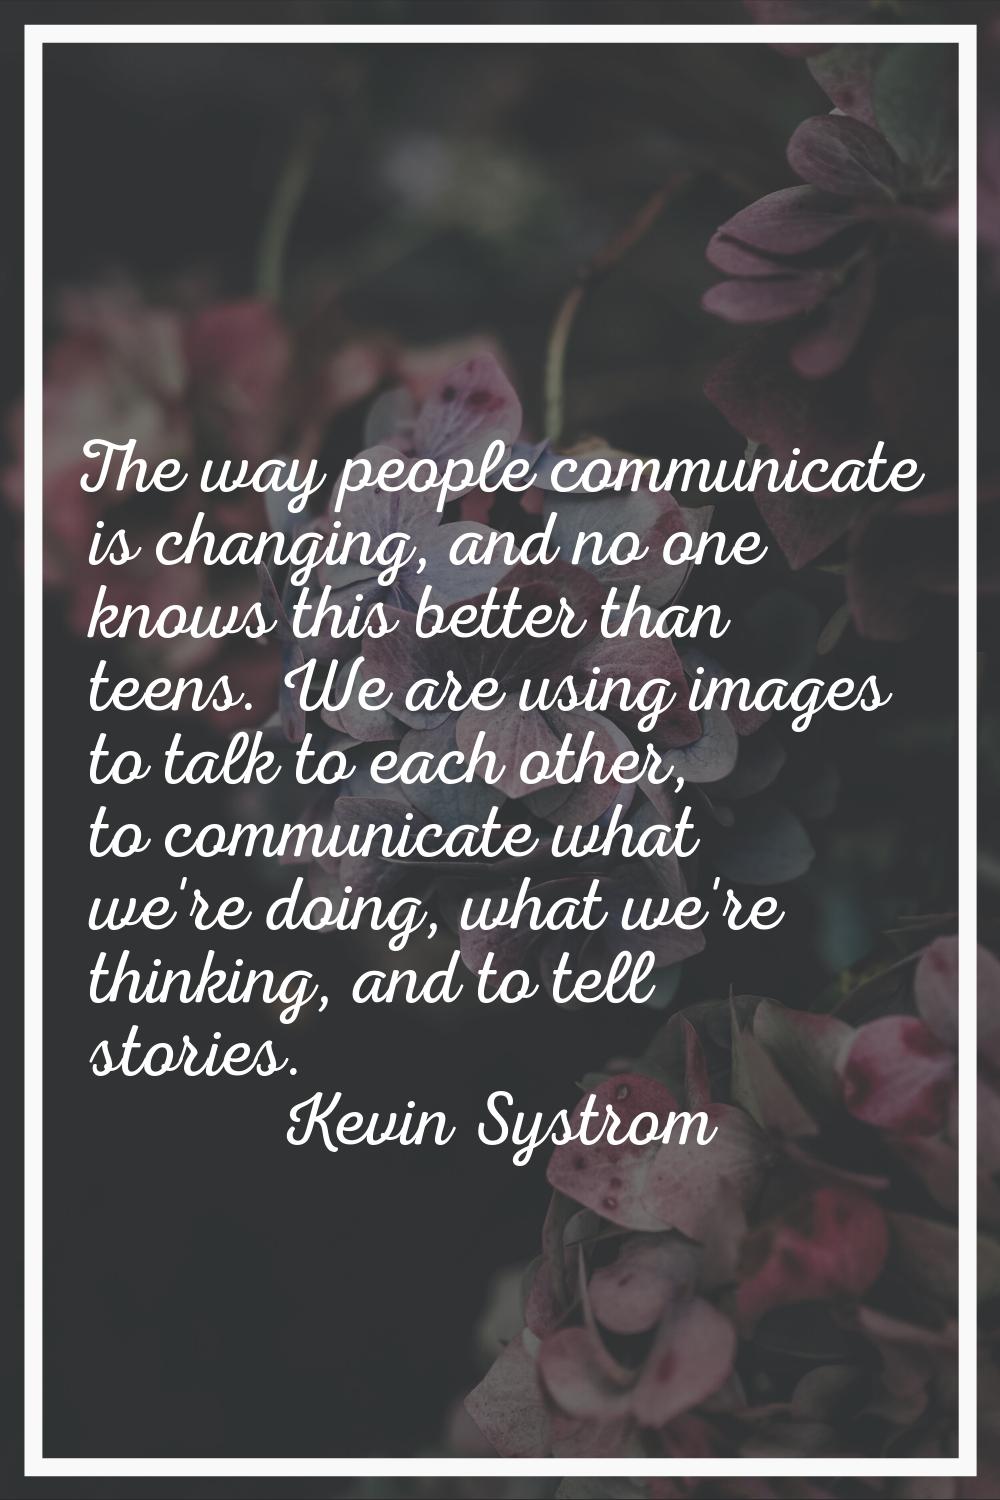 The way people communicate is changing, and no one knows this better than teens. We are using image